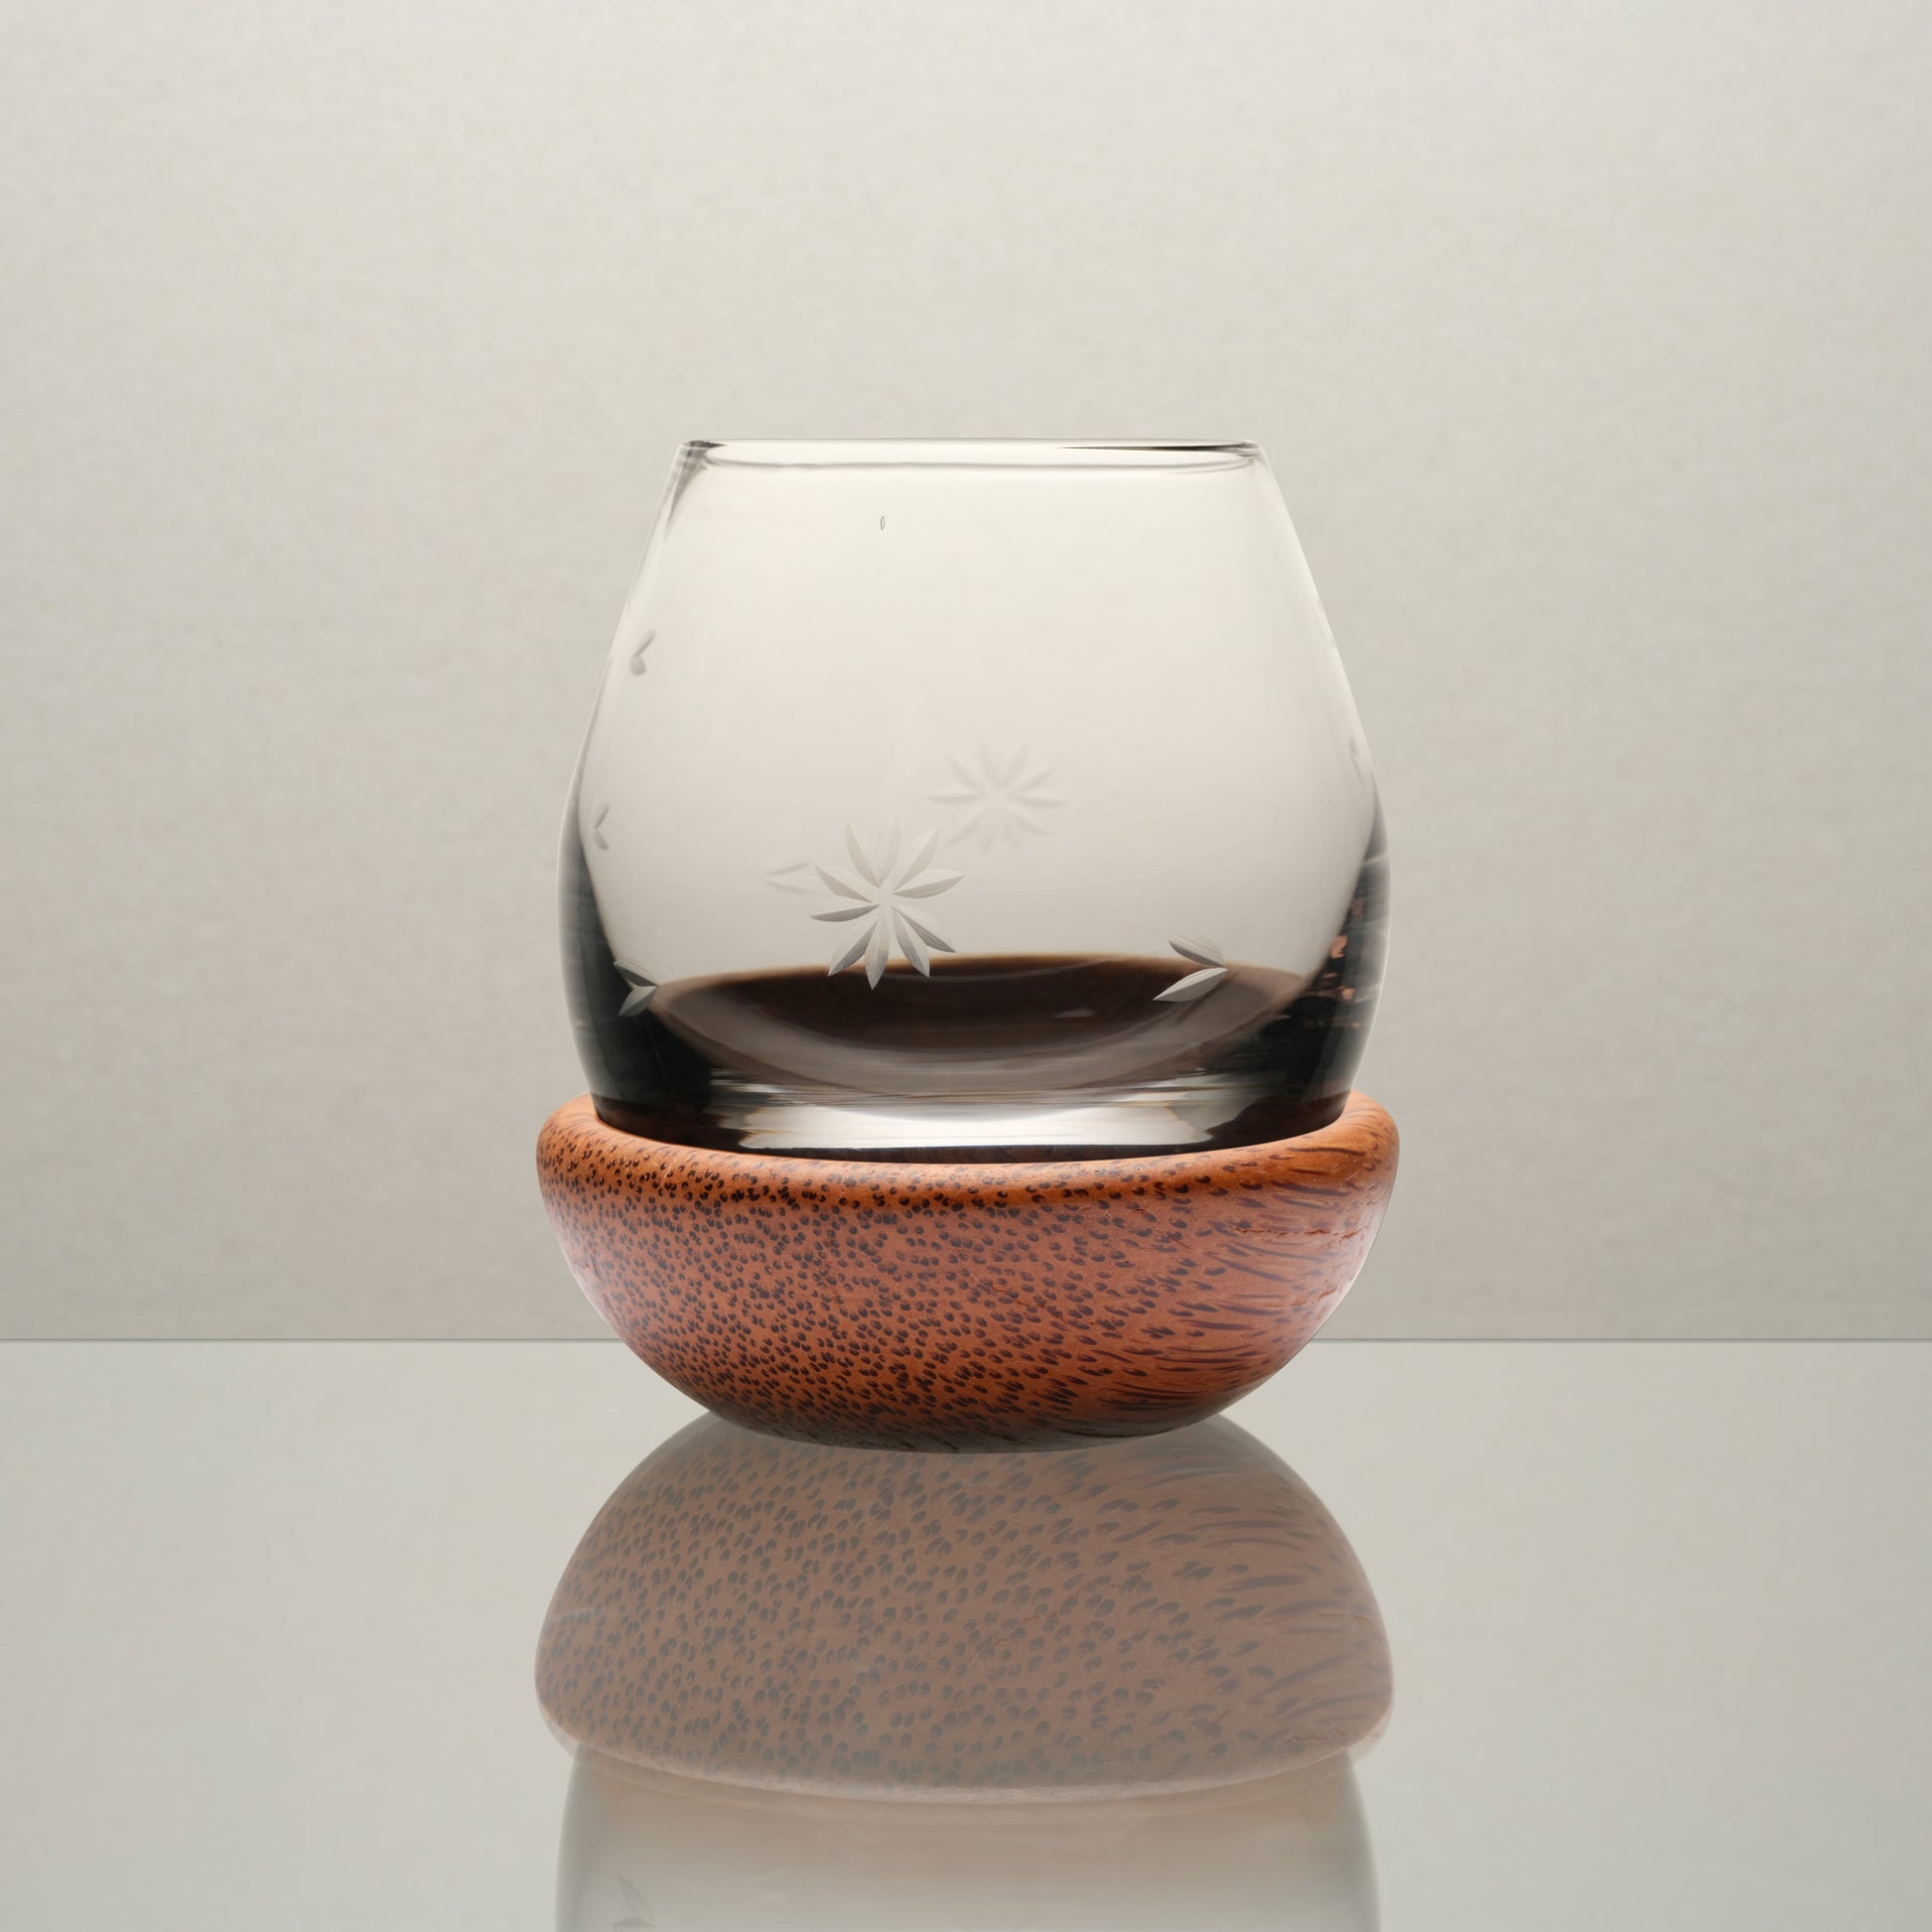 Japan Inspired Crystal Whisky Roll Glass